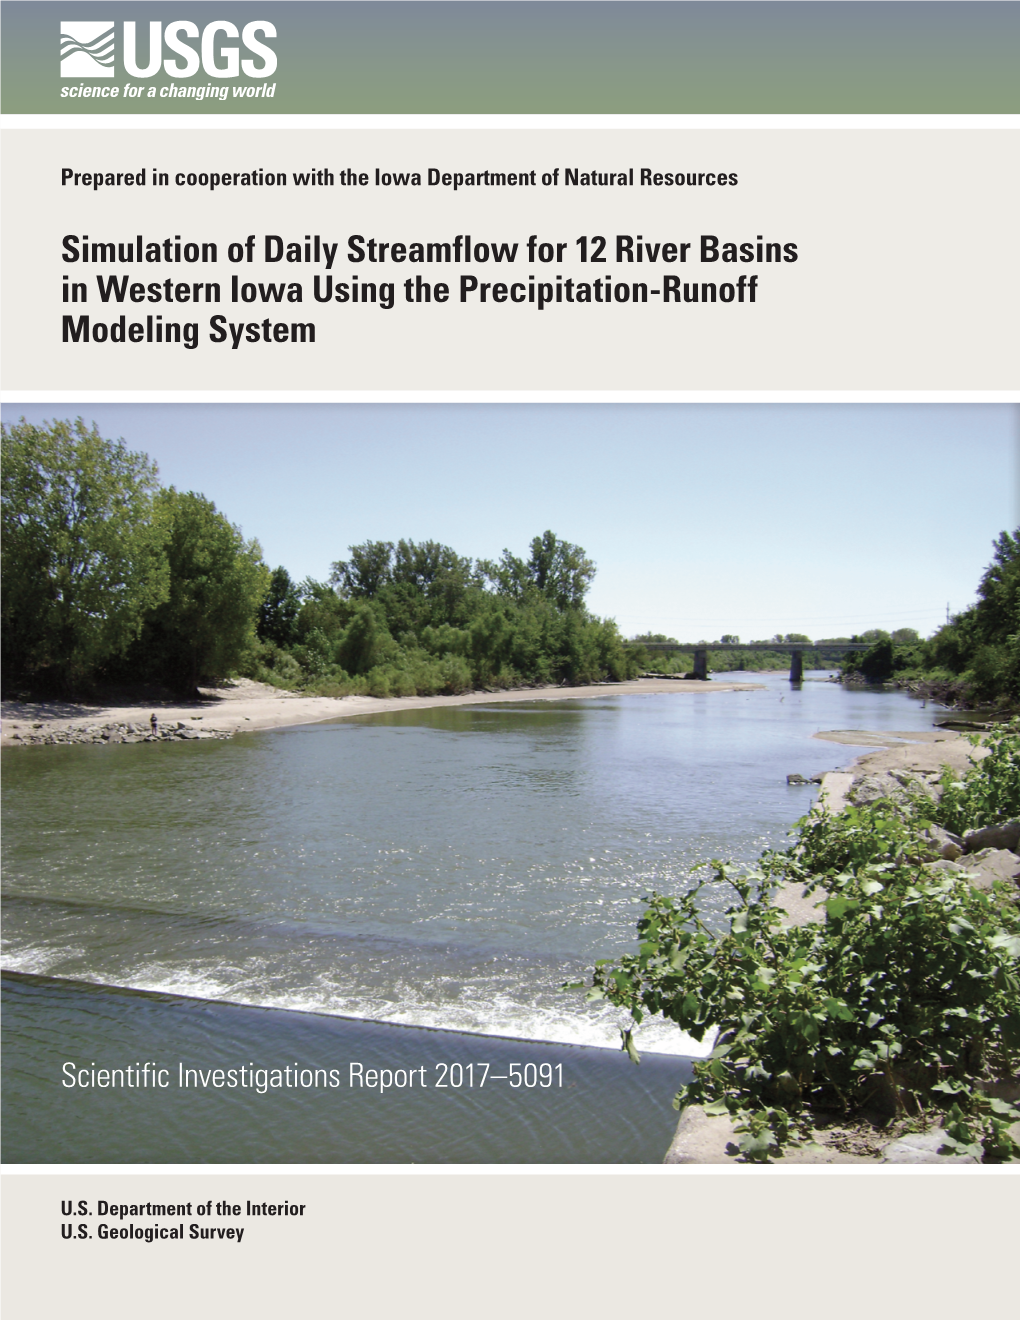 Simulation of Daily Streamflow for 12 River Basins in Western Iowa Using the Precipitation-Runoff Modeling System